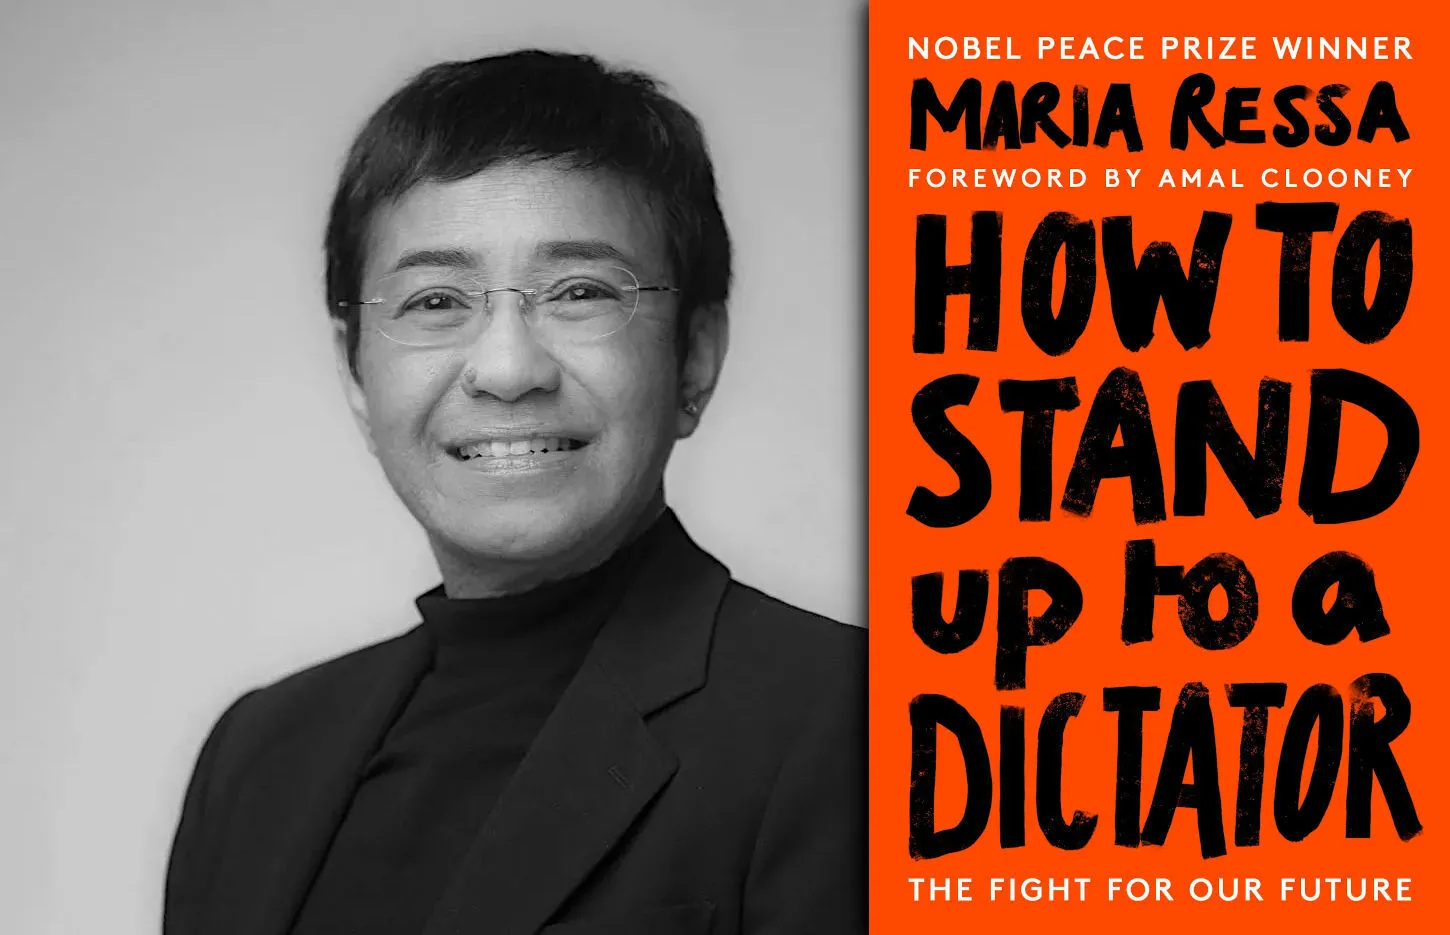 How to Stand Up to a Dictator’ by Maria Ressa book cover (right) and a portrait of the author (left). Images: Supplied / The Reading List